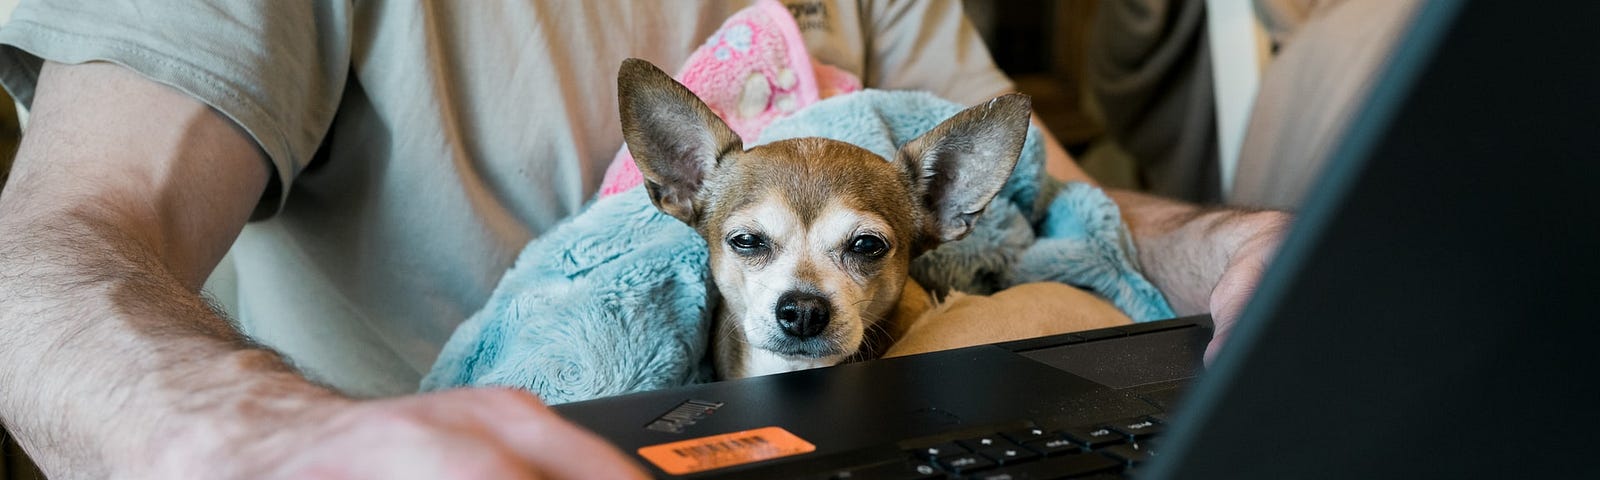 A small dog sits in the lap of a person working on a laptop.